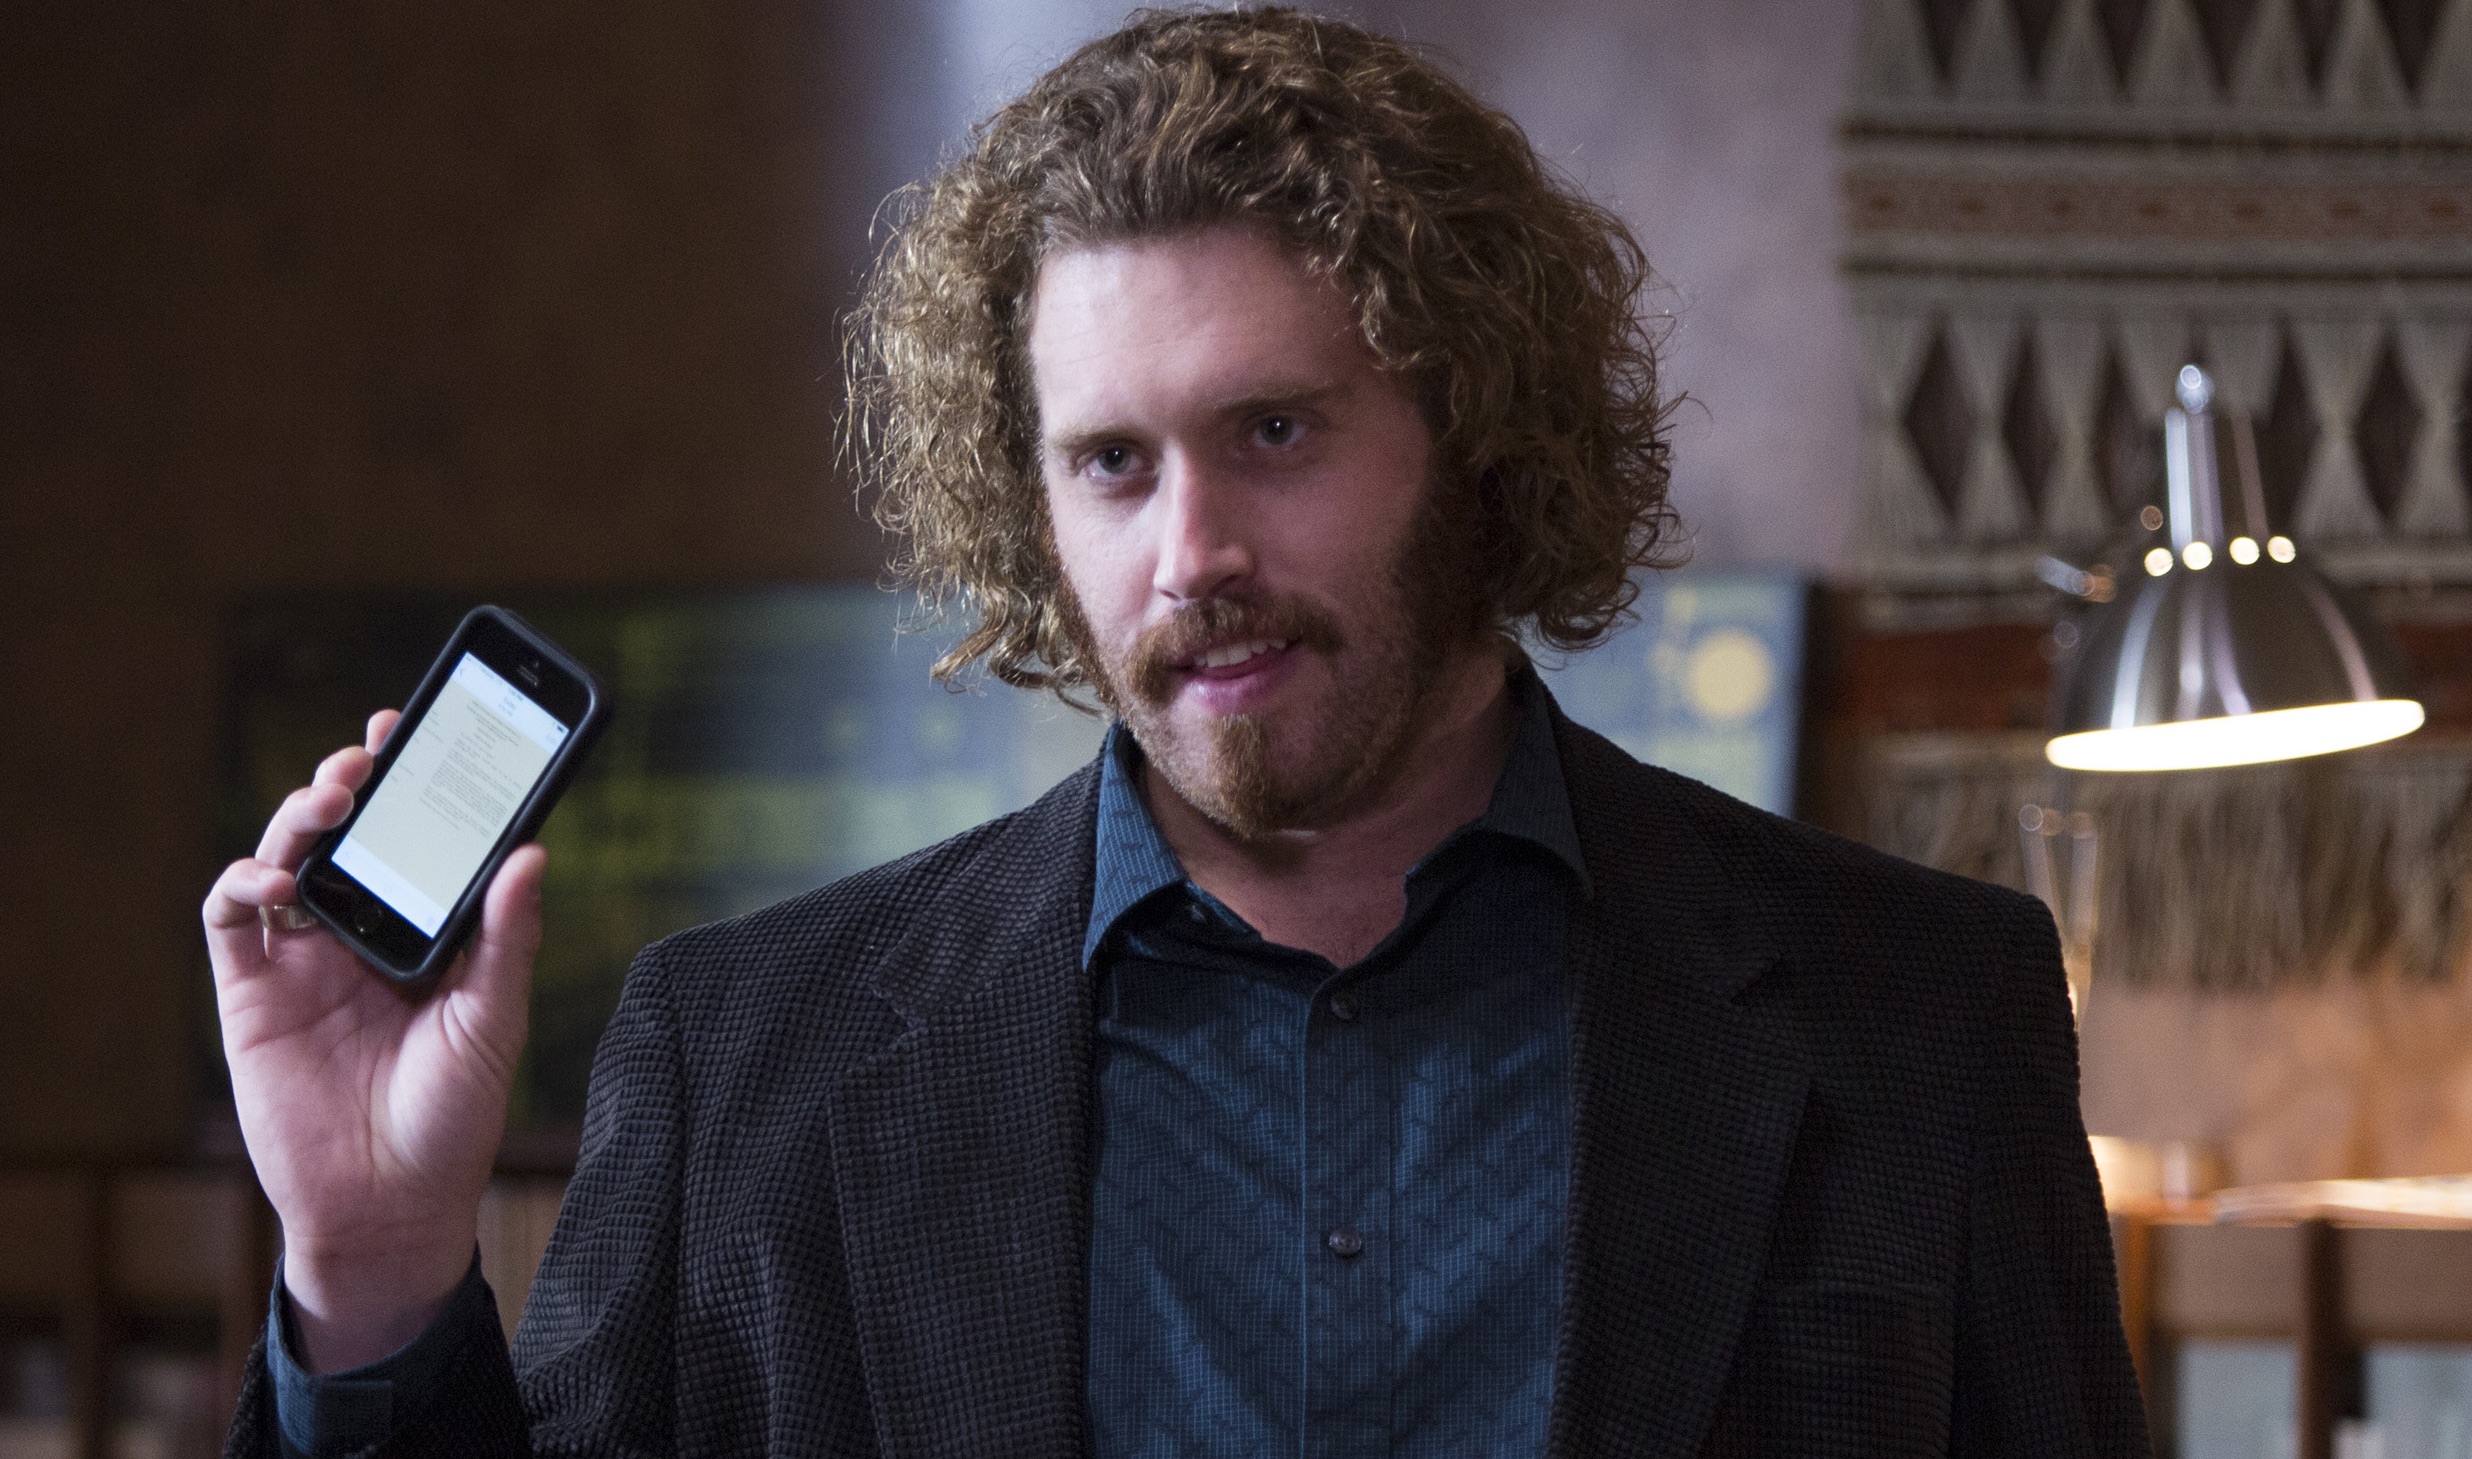 T.J. Miller called in fake bomb threat